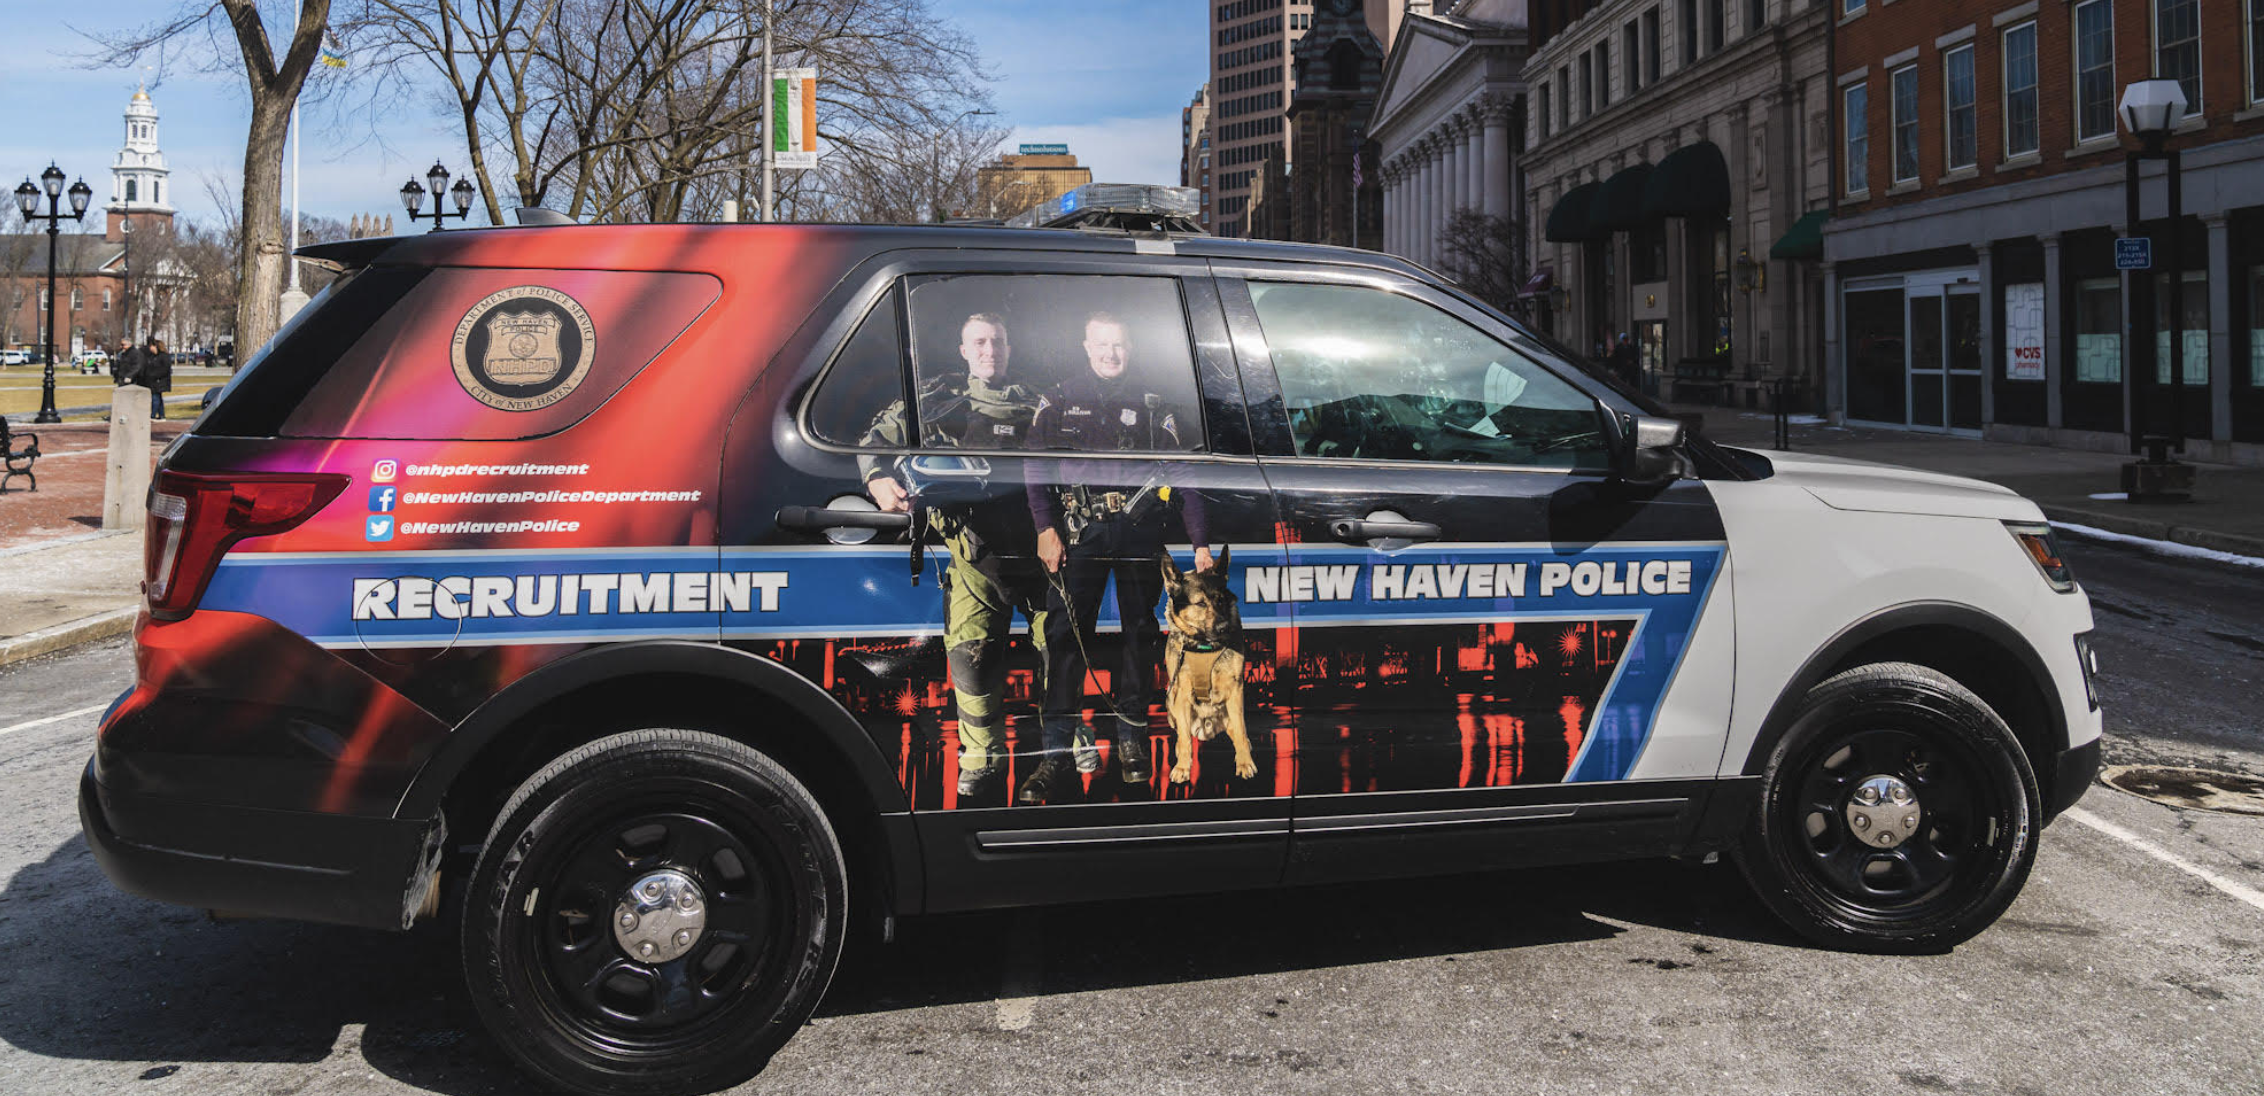 New Haven Police Department, CT Public Safety Jobs